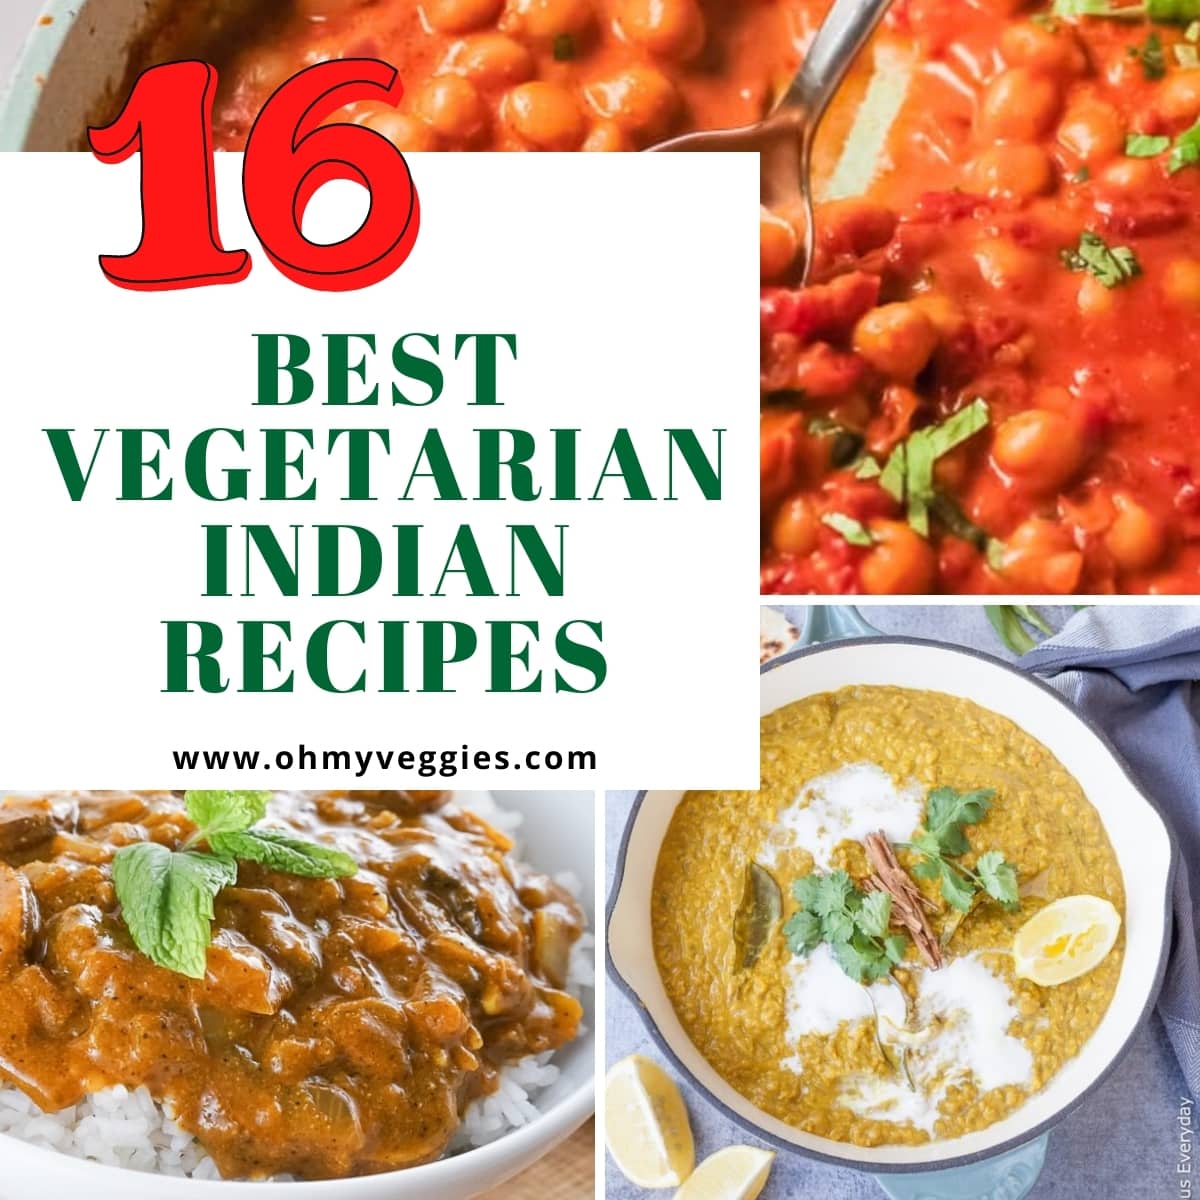  vegetarian Indian (or Indian inspired) recipes 